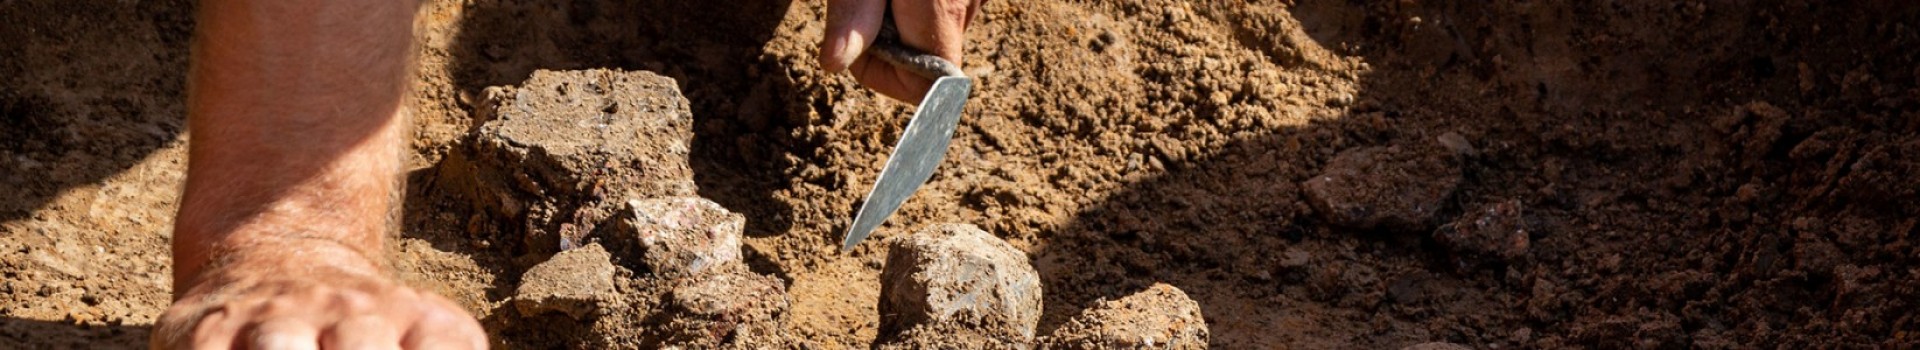 A detail of a trowel being used to excavate and archaeological feature.